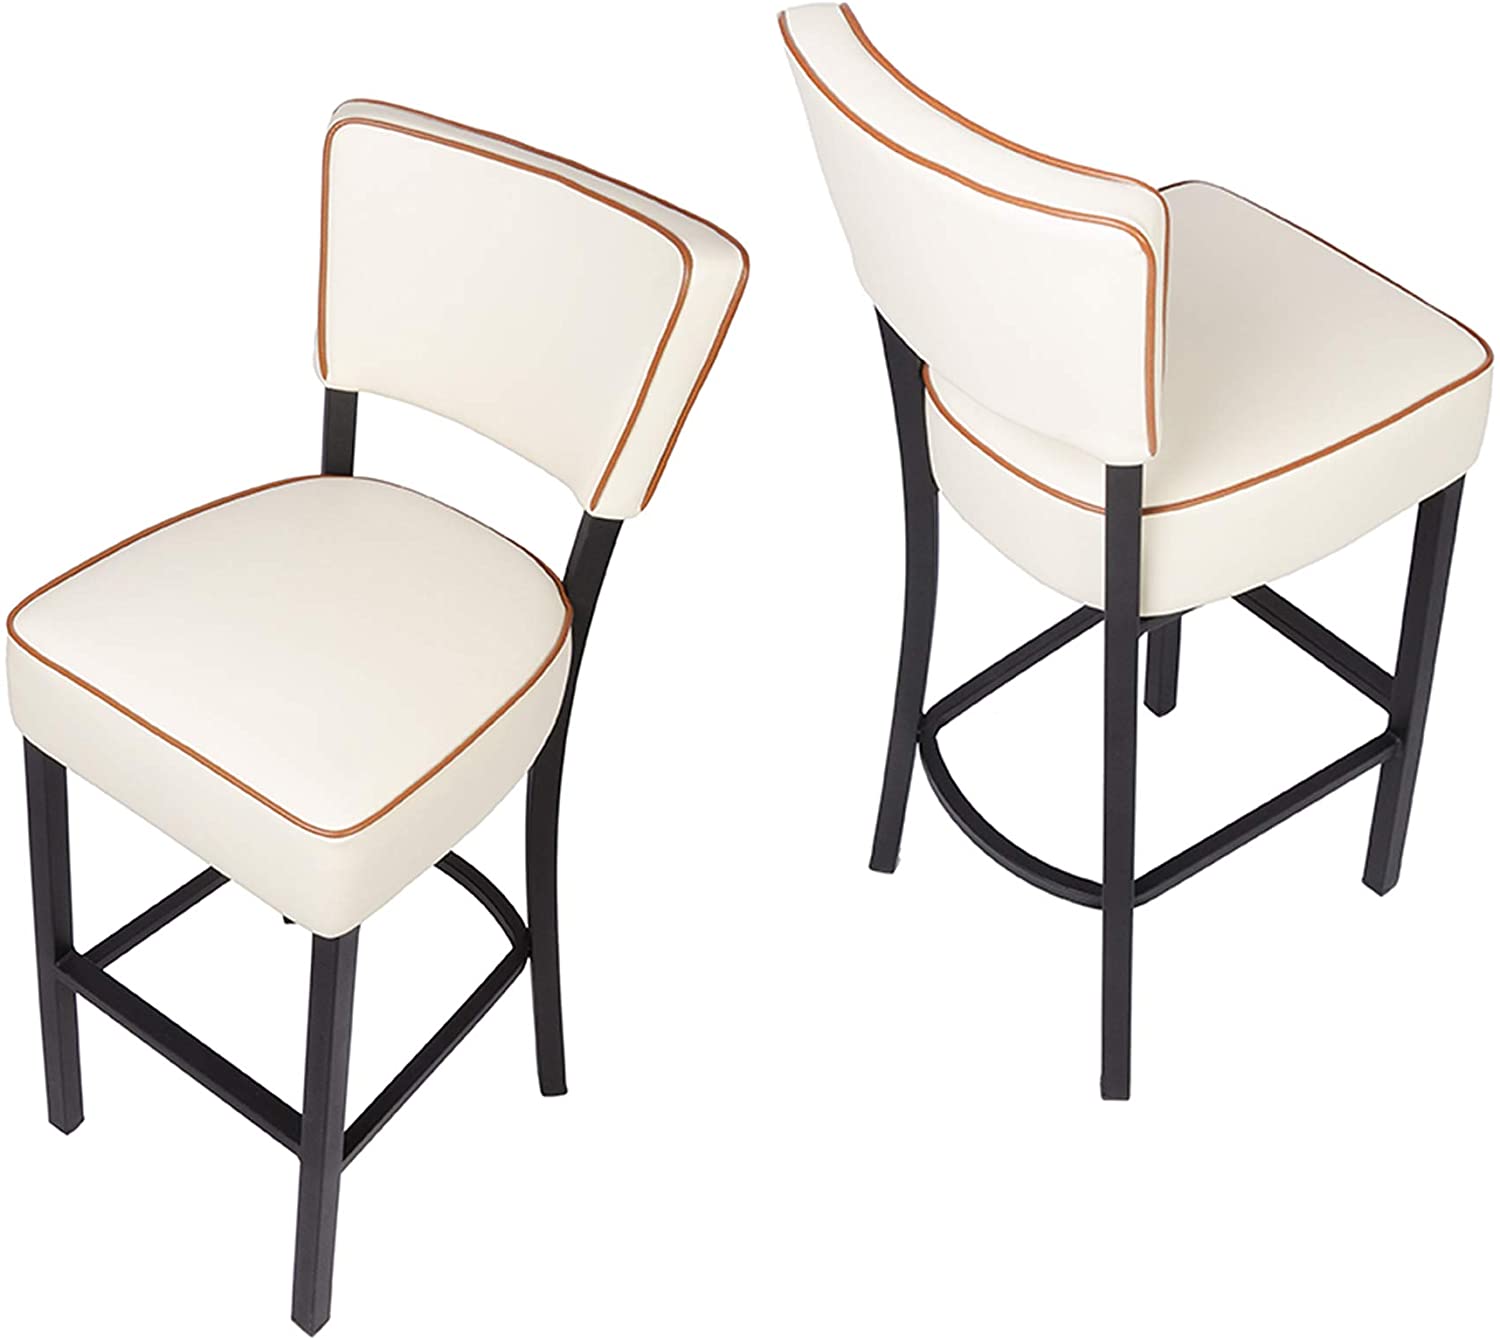 30” Bar Stools Set of 2 Kitchen Chairs Counter Pub Height Leather Modern Breakfast Dining Chairs Home Furniture, Beige